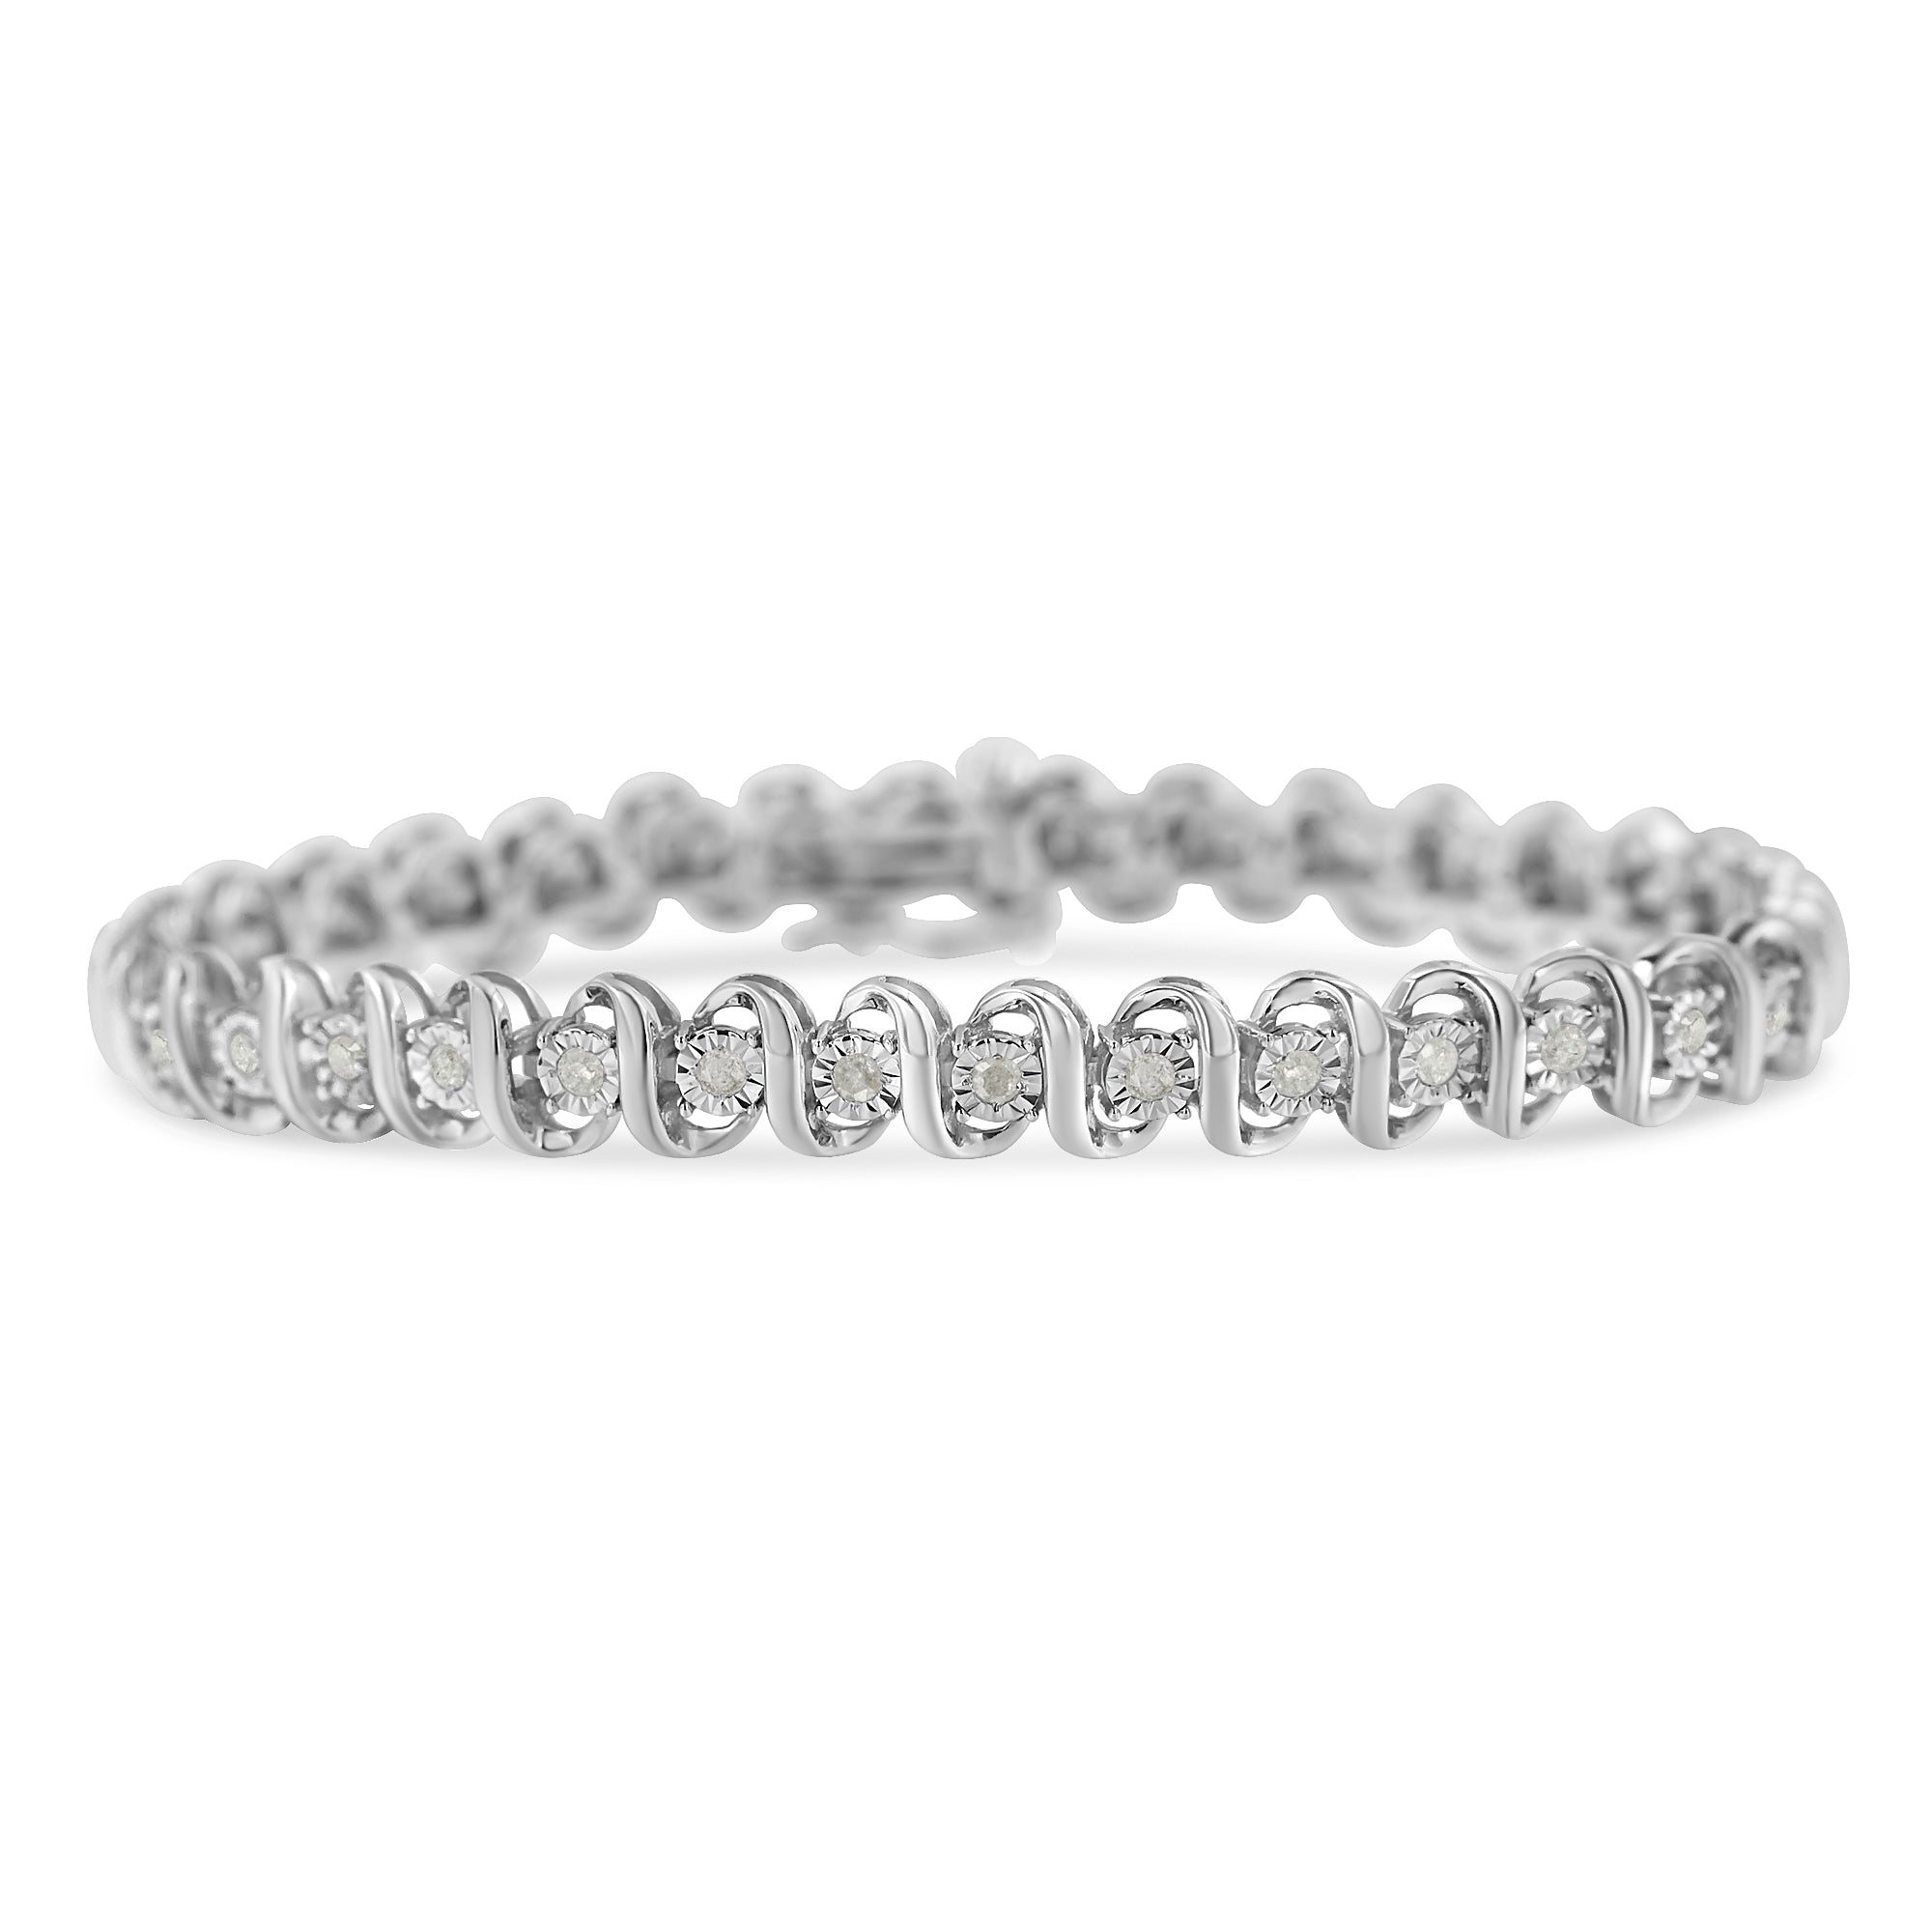 .925 Sterling Silver 1.0 Cttw Miracle-Set Round Diamond S-Link Tennis Bracelet (I-J Color, I3 Clarity) -7